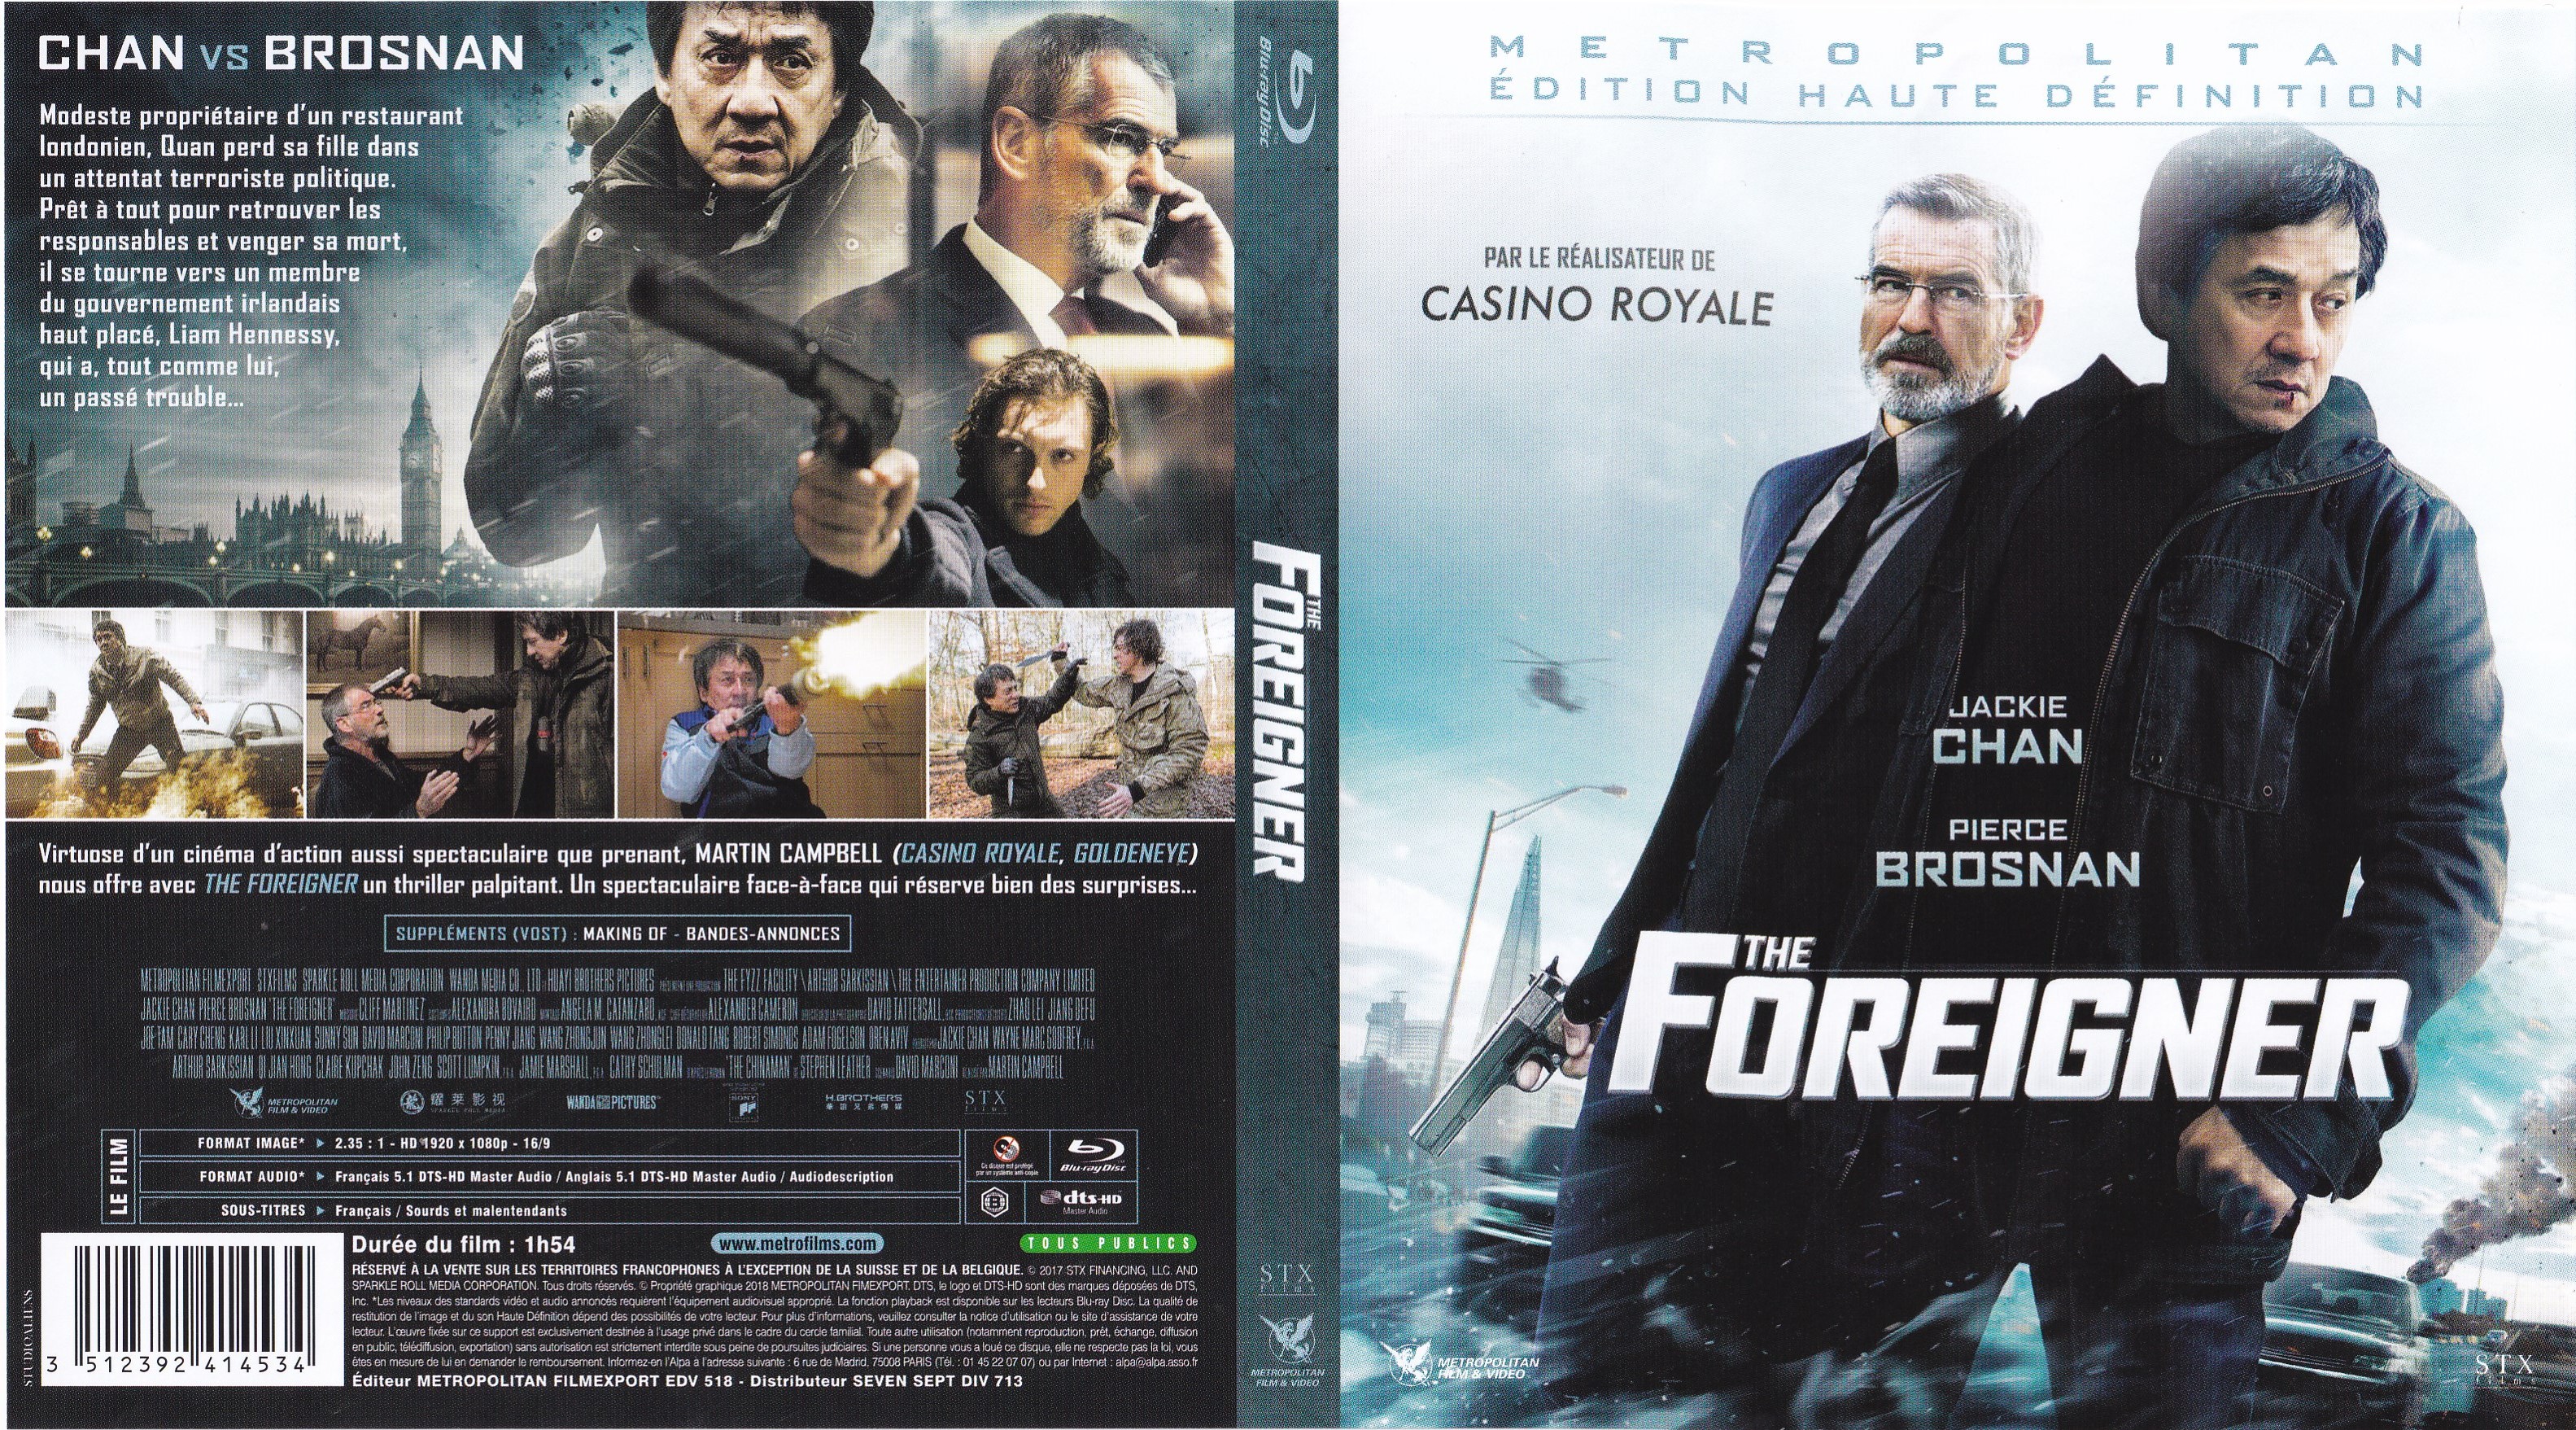 Jaquette DVD The Foreigner (BLU-RAY)